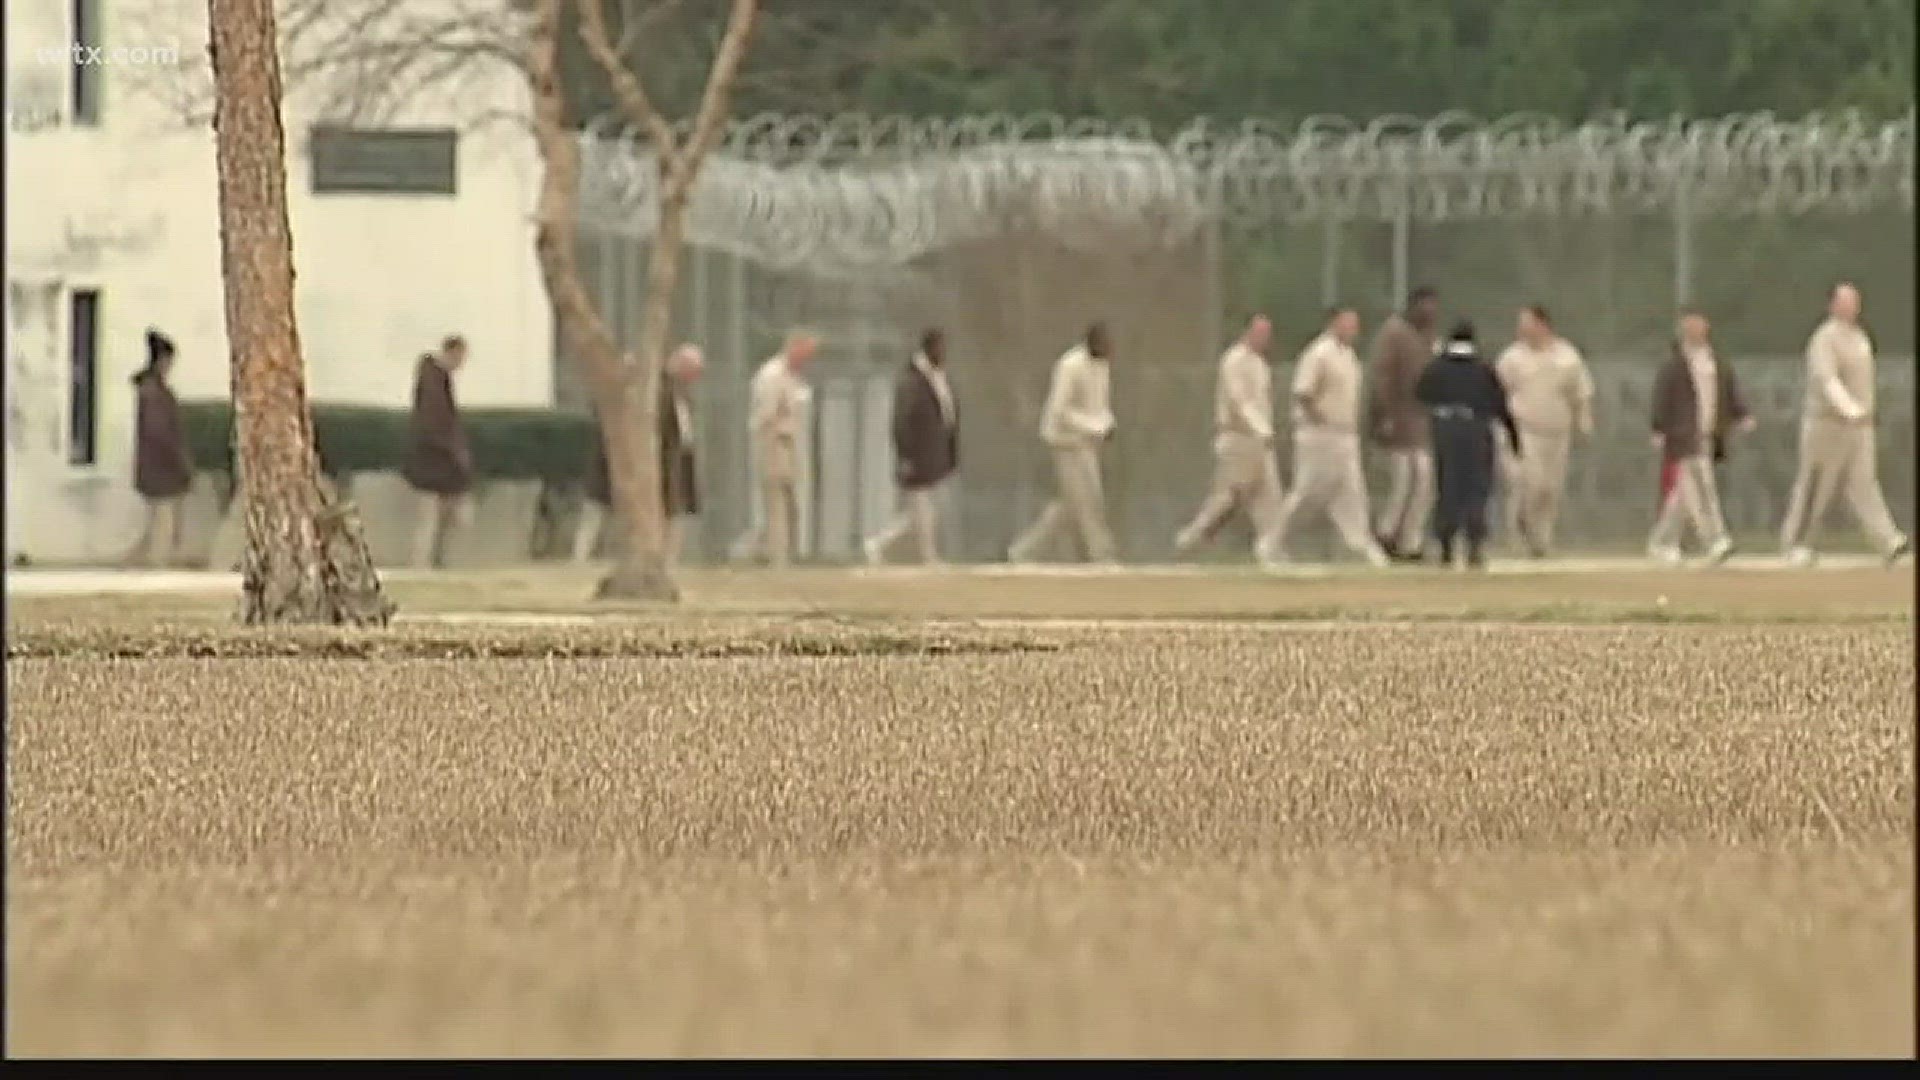 SCDC transferred 48 inmates who are described as problematic.